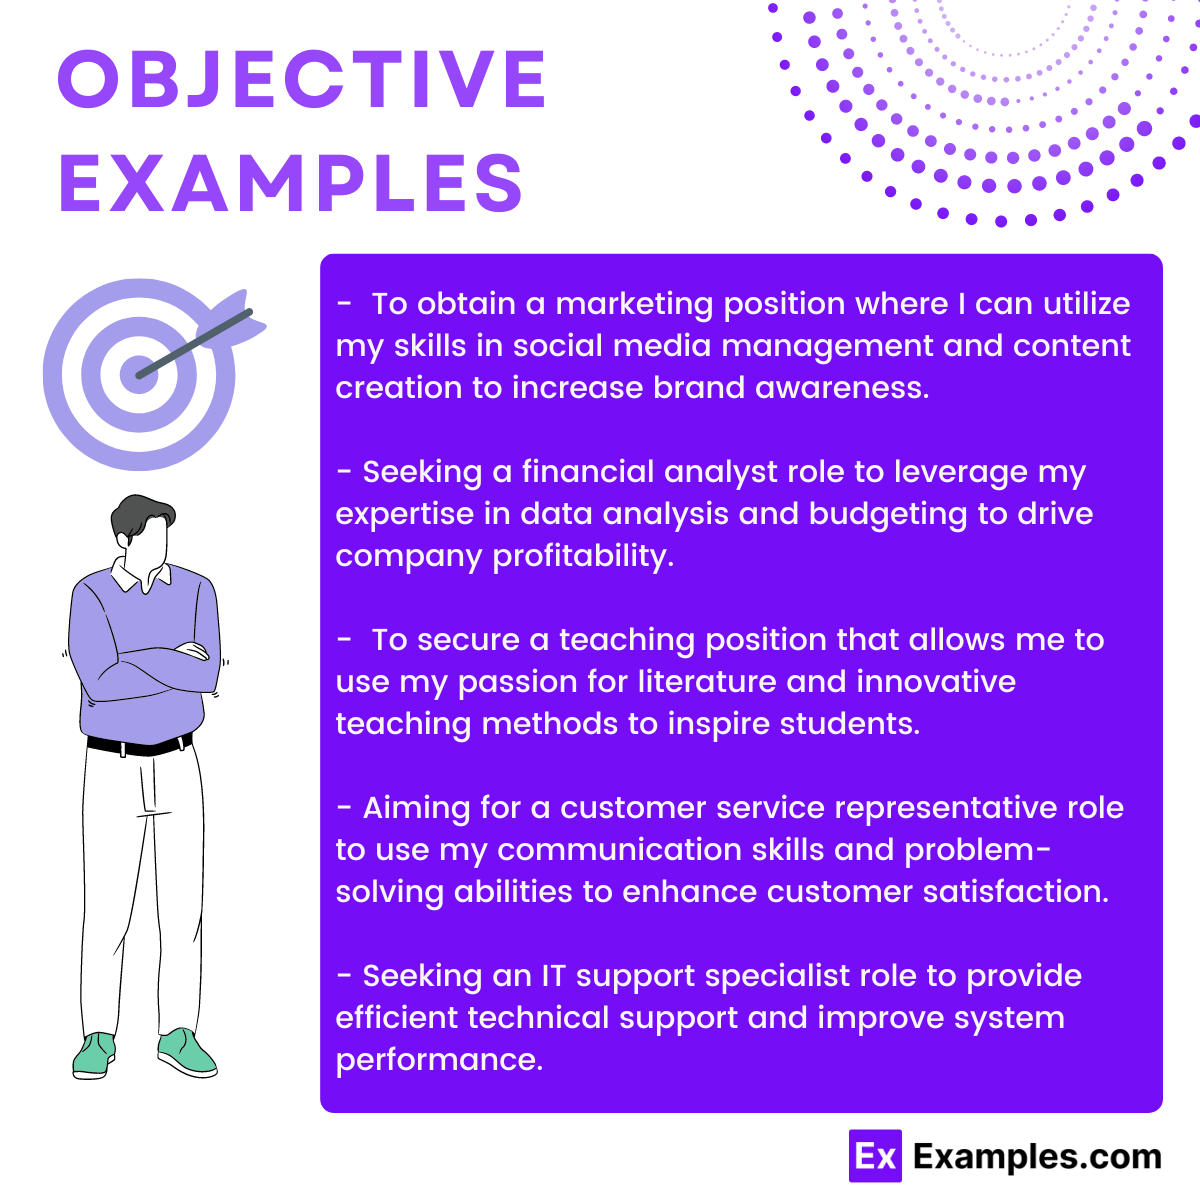 Objective Examples